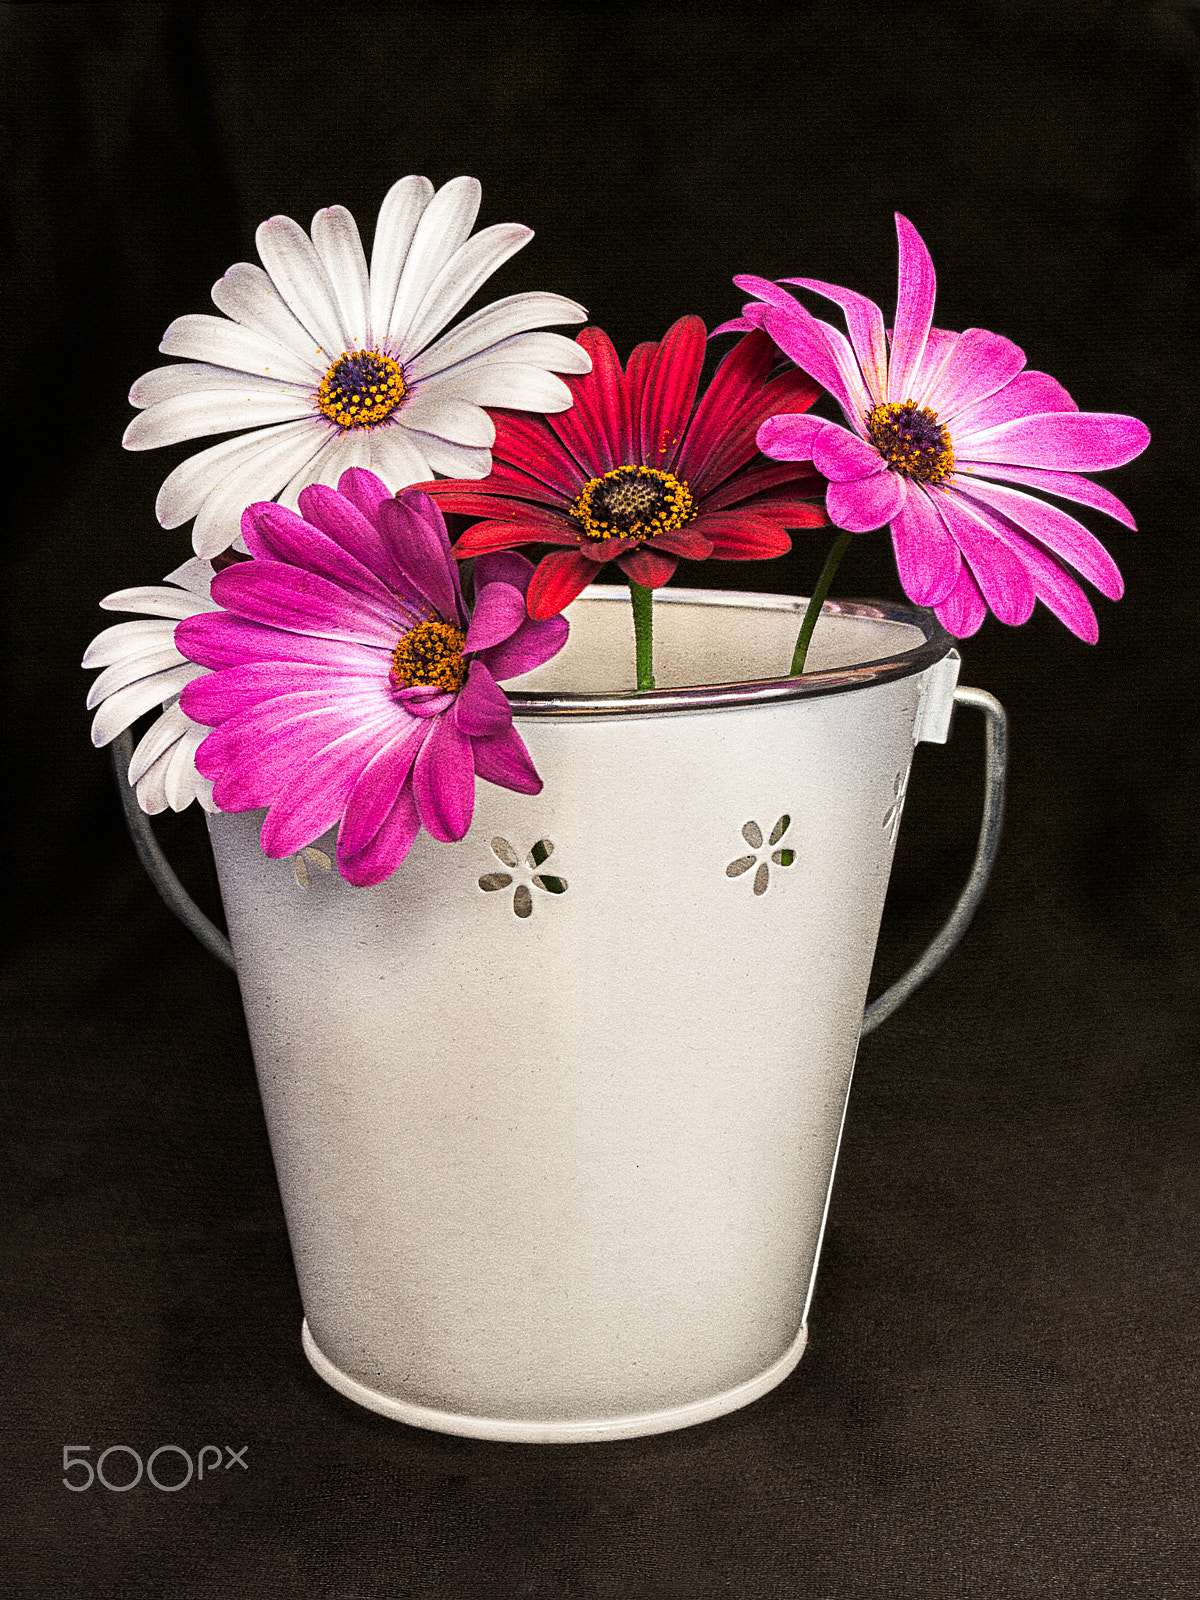 Nikon D90 + Tamron SP AF 17-50mm F2.8 XR Di II VC LD Aspherical (IF) sample photo. Bucket with flowers photography